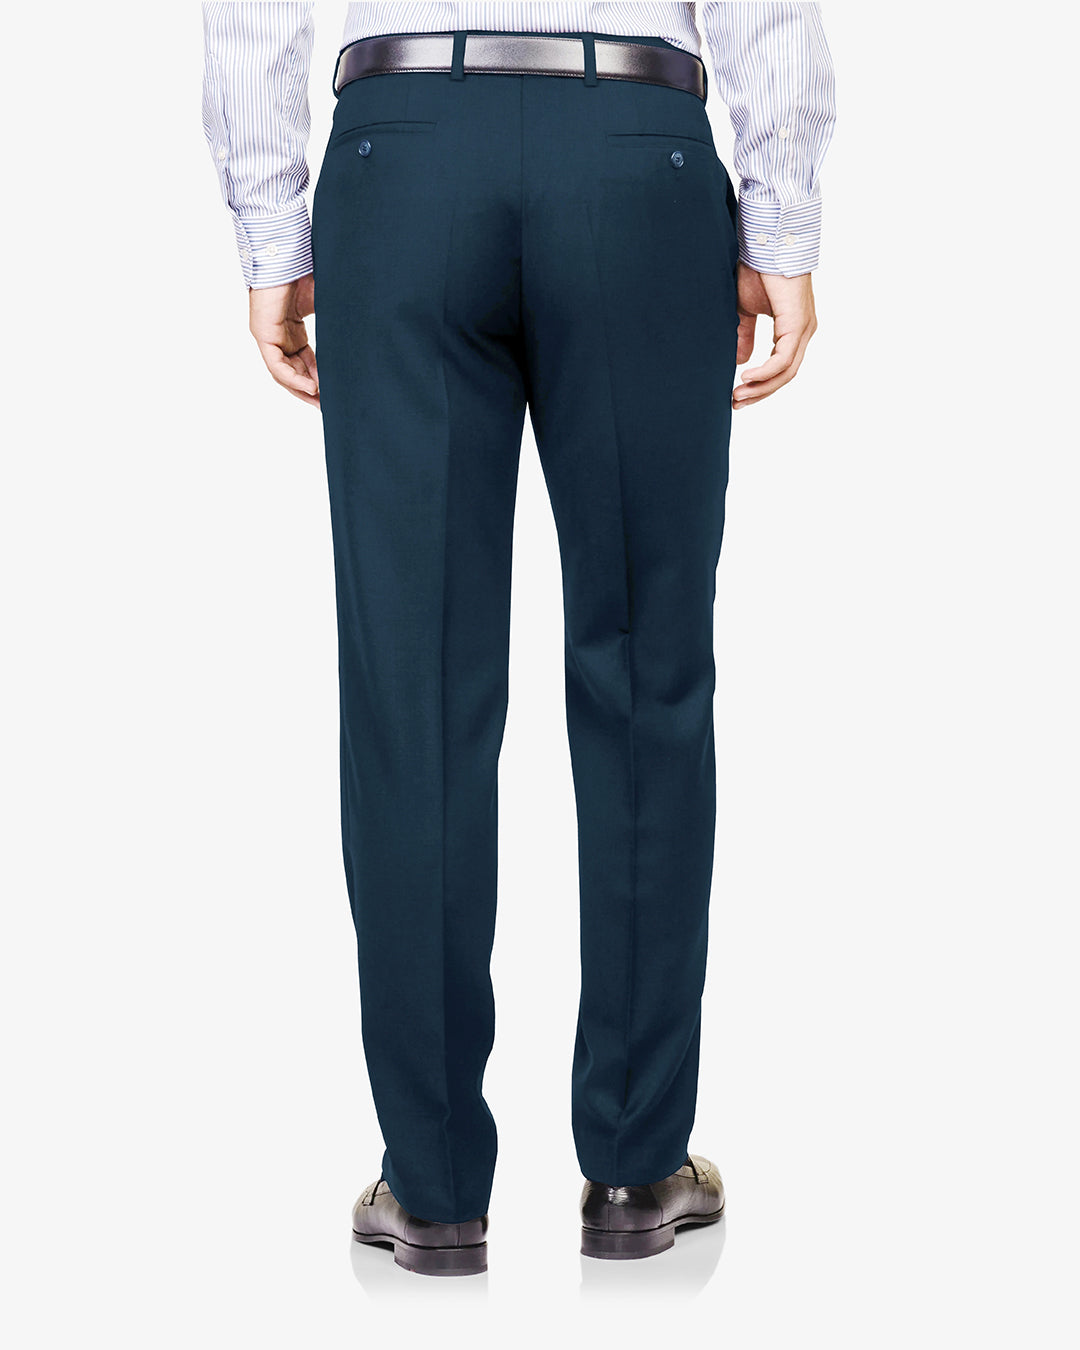 Navy Twill Stretchable chino